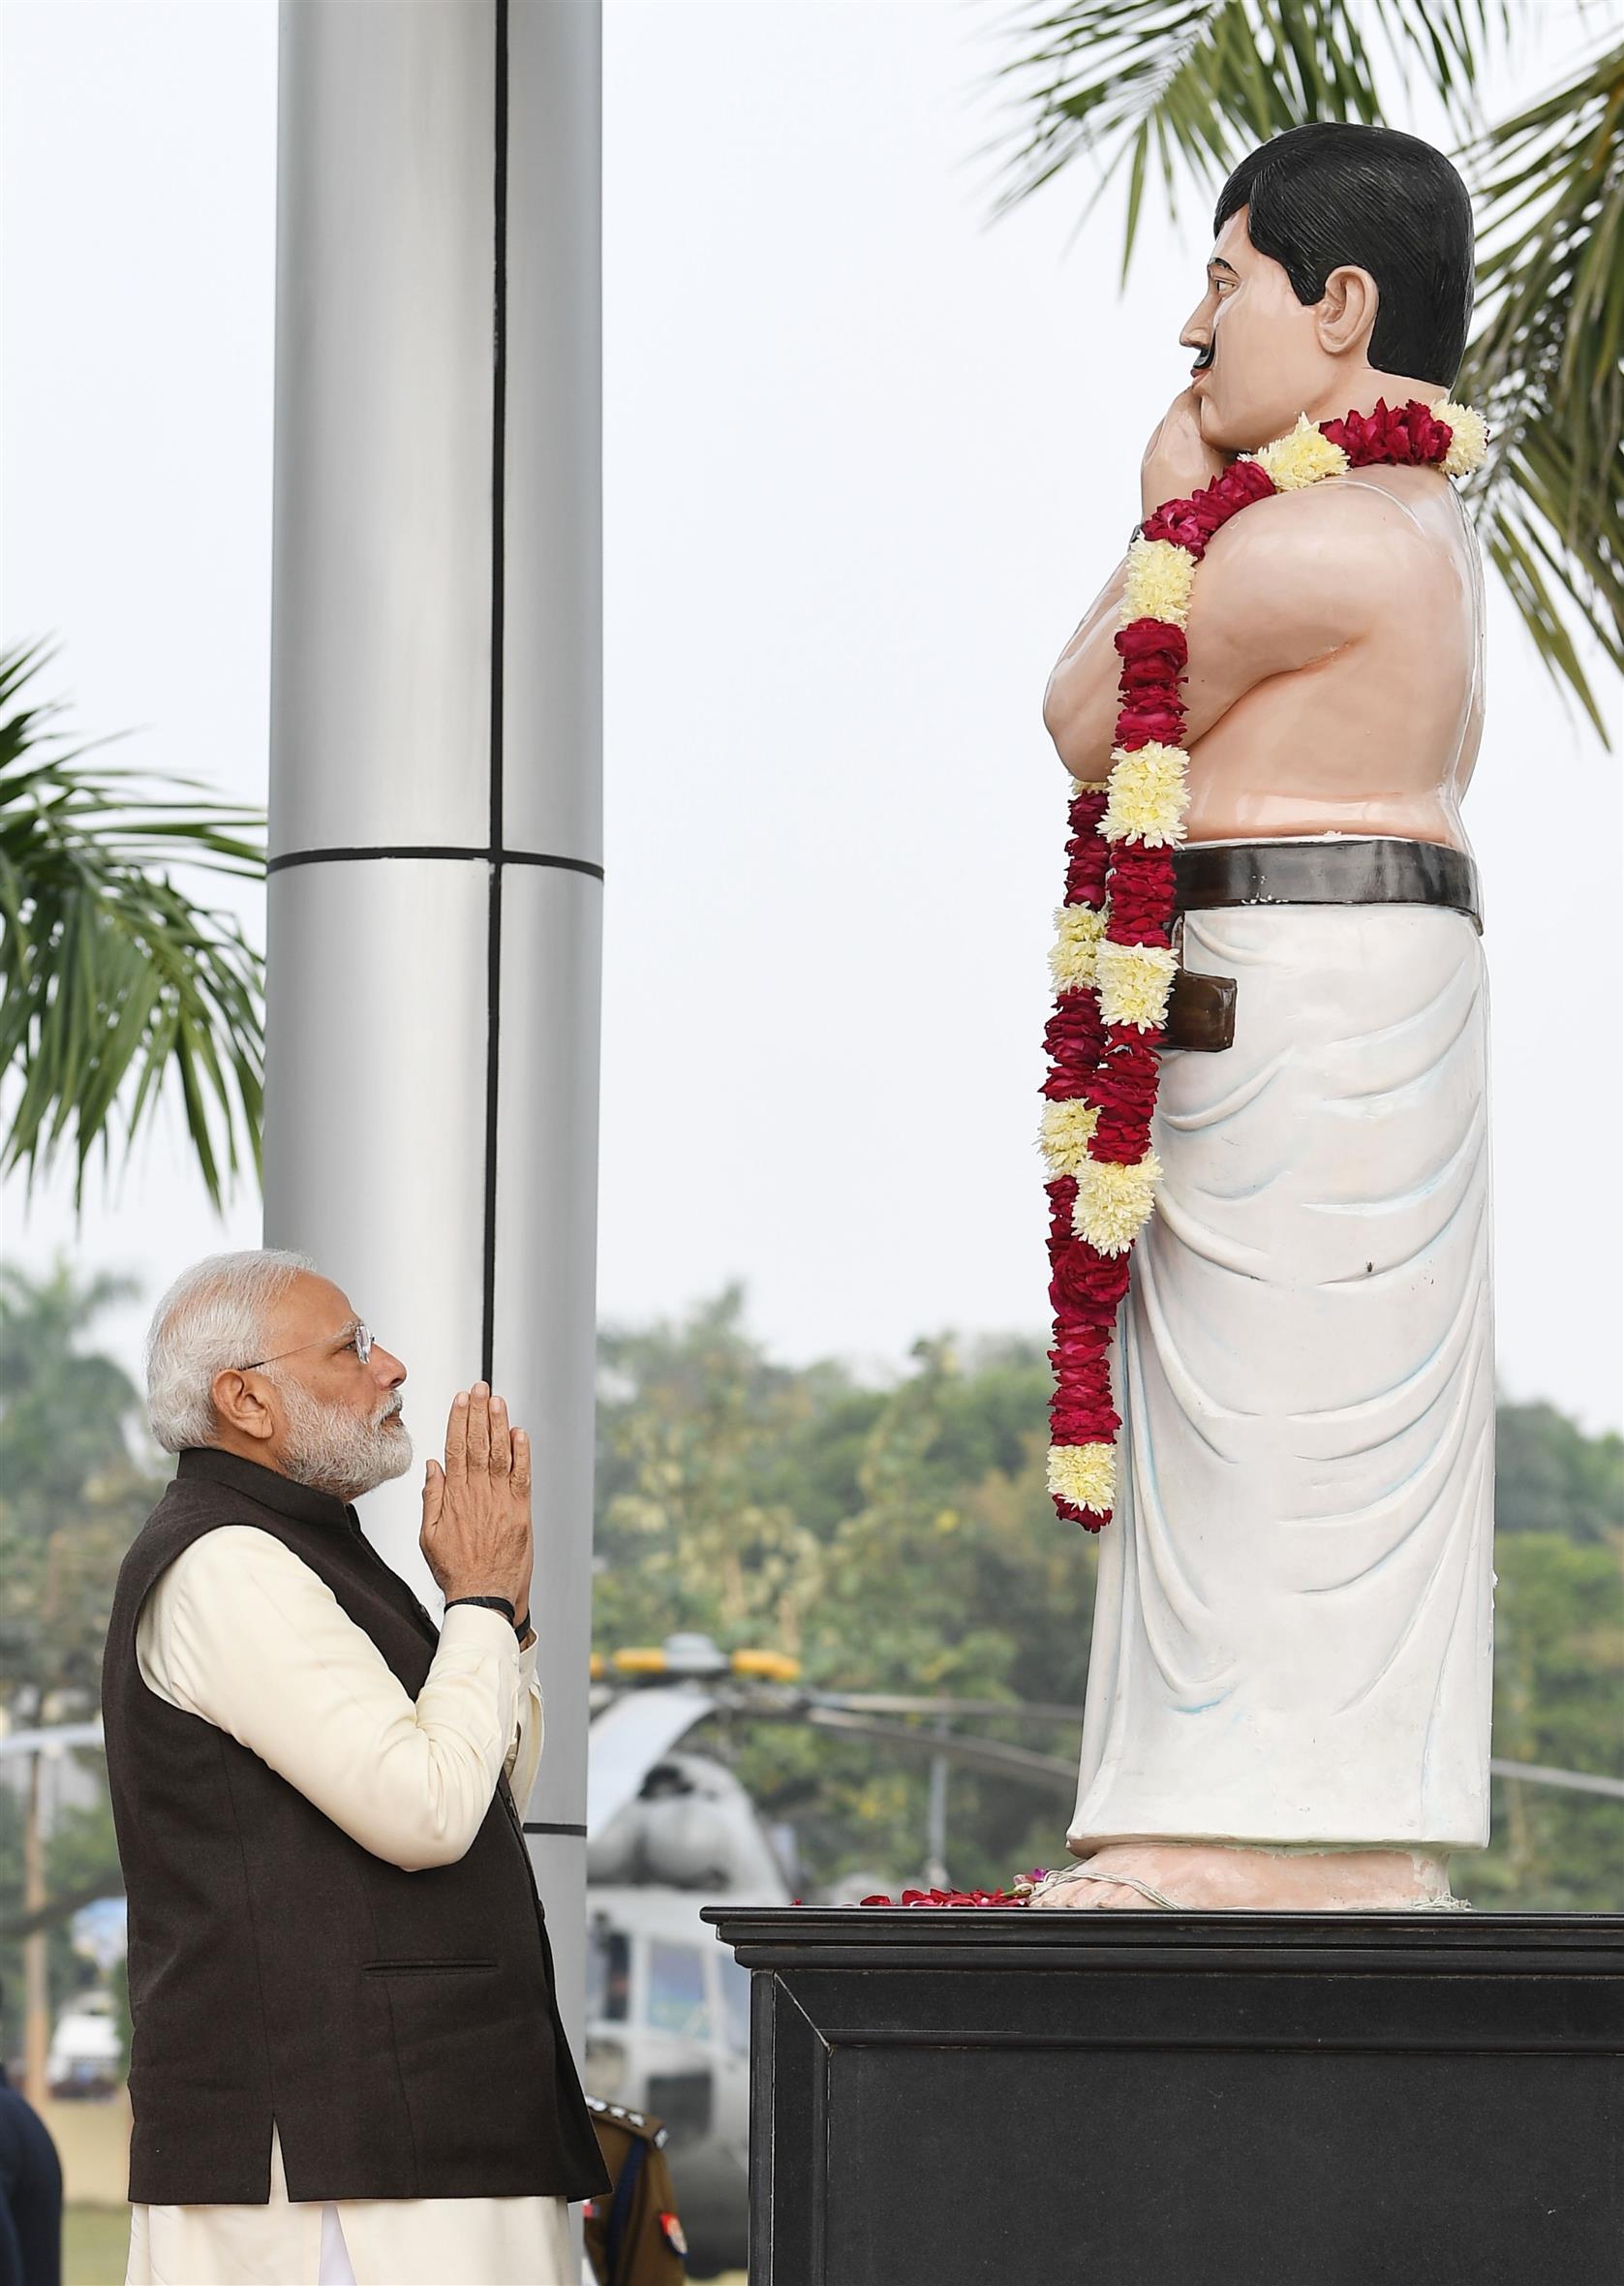 The Prime Minister, Shri Narendra Modi paying homage to the freedom fighter Chandra Shekhar Azad, in Kanpur on December 14, 2019.